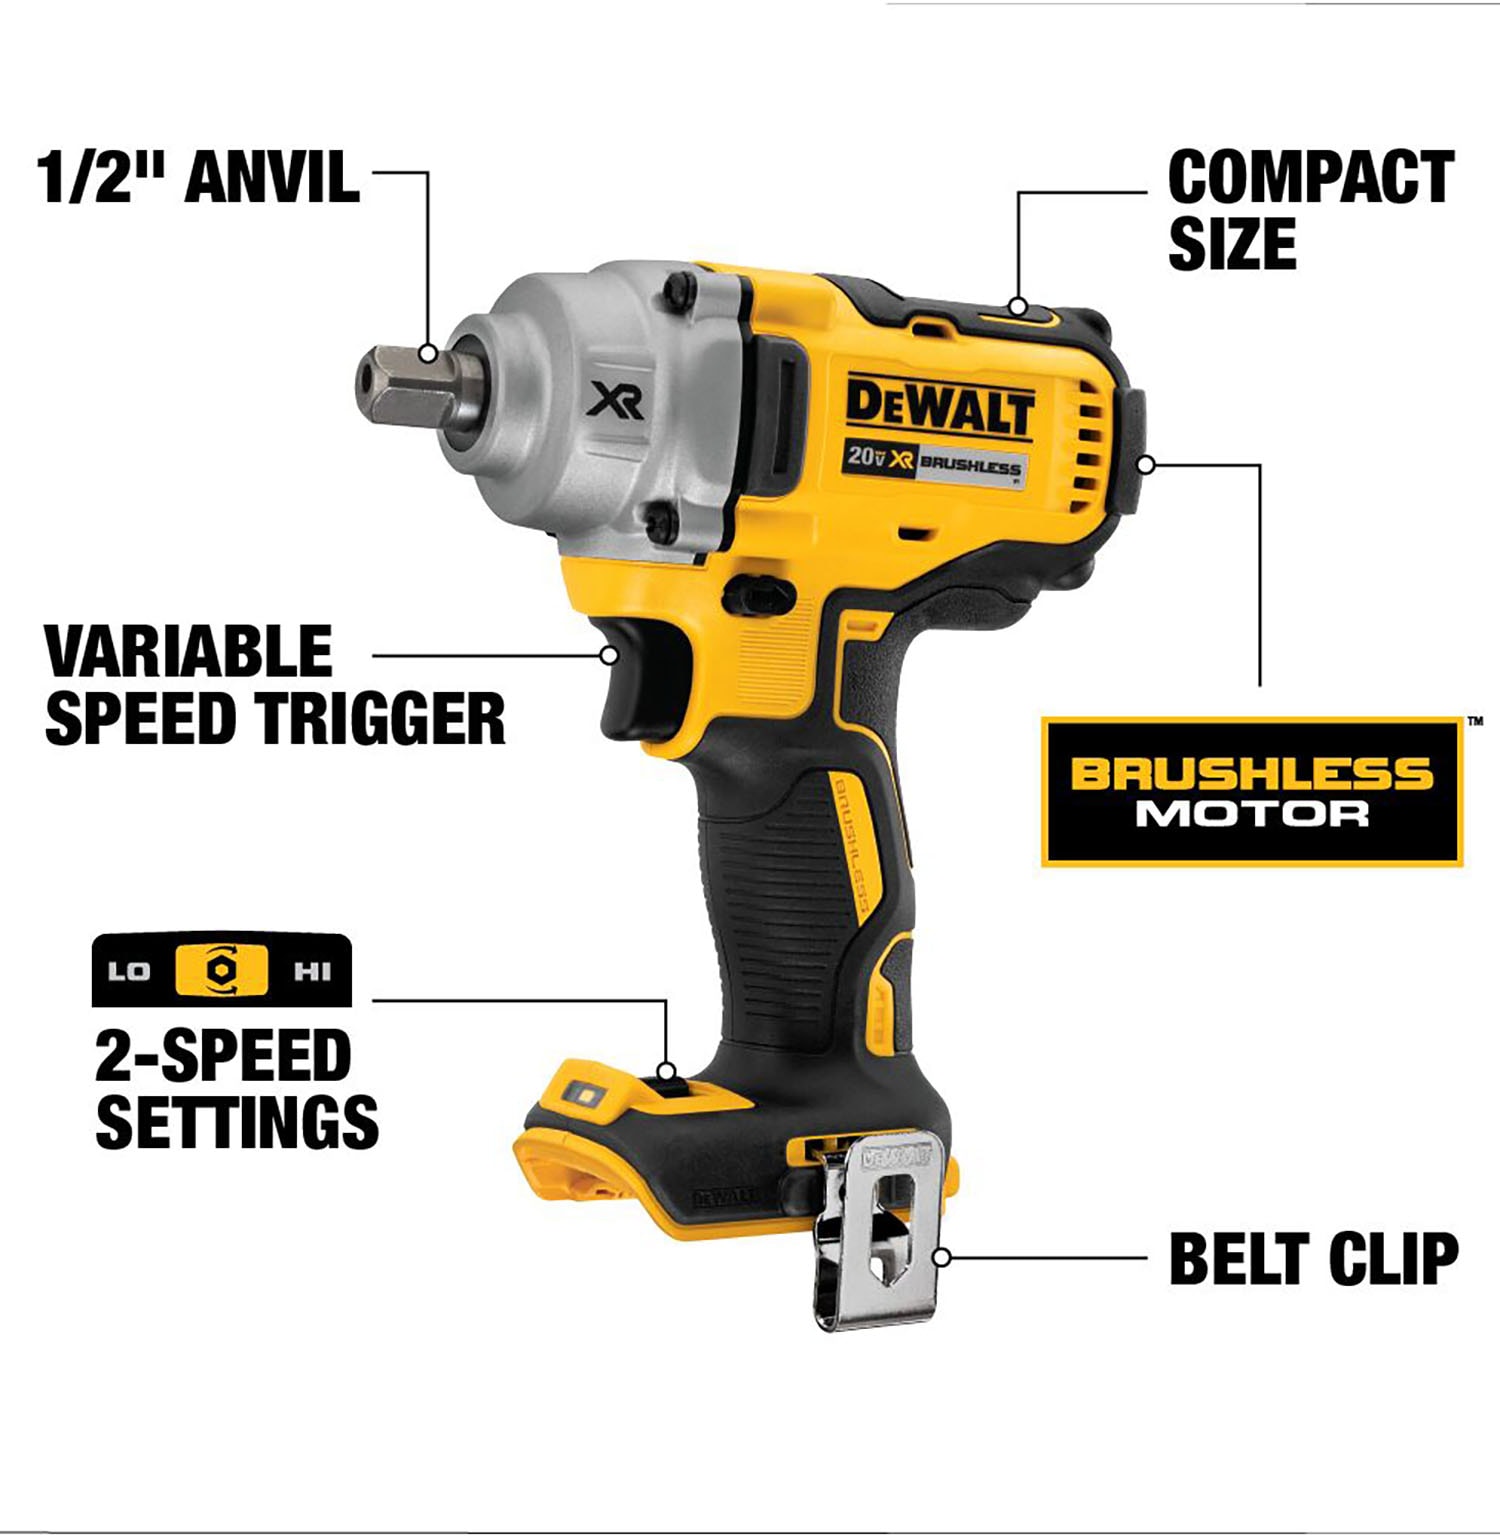 Shop DEWALT XR 20-Volt Max SDS-Plus Variable Speed Cordless Rotary Hammer Drill & XR 20-volt Max Variable Speed 1/2-in Drive Cordless Impact Wrench at Lowes.com